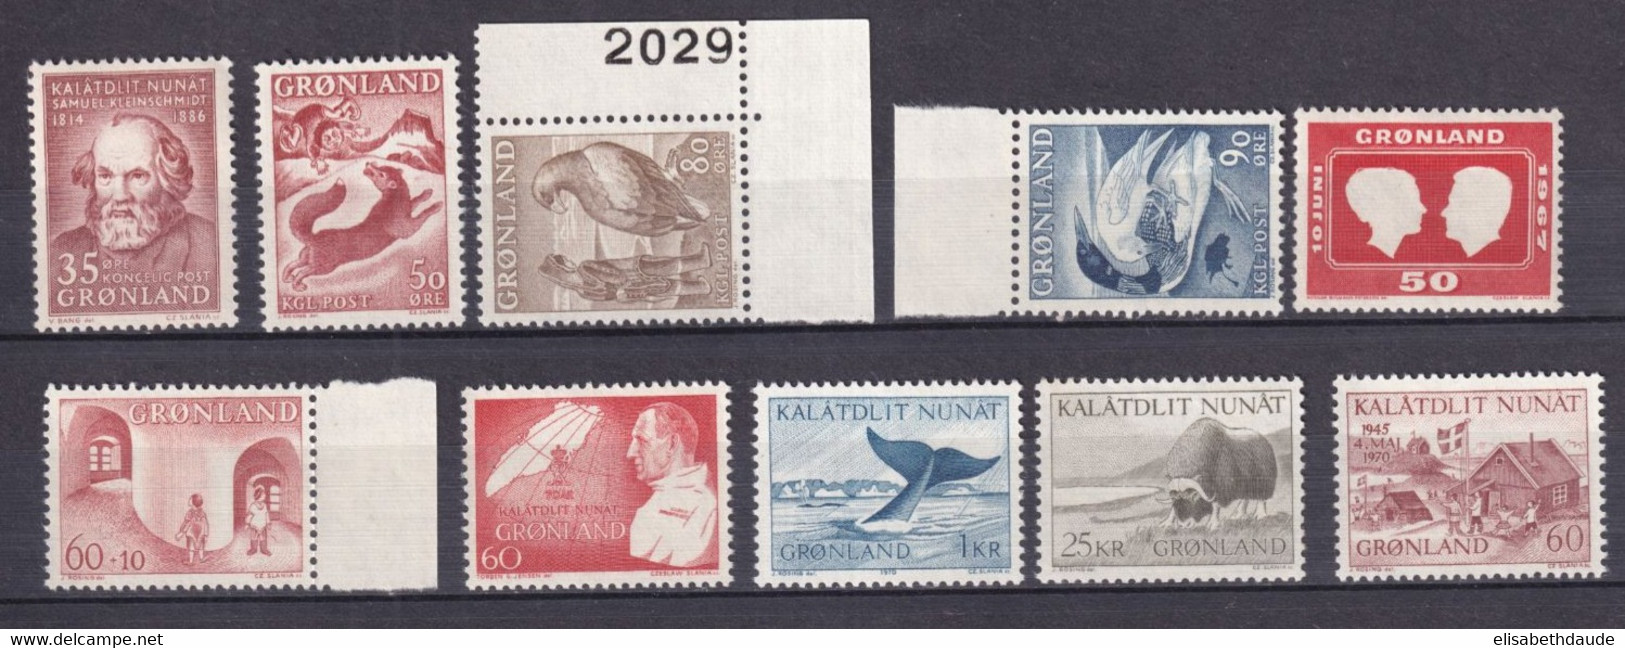 GROENLAND - ANNEES COMPLETES 1964 à 1970 - YVERT N°55/64 ** MNH - COTE = 32 EUR - - Annate Complete